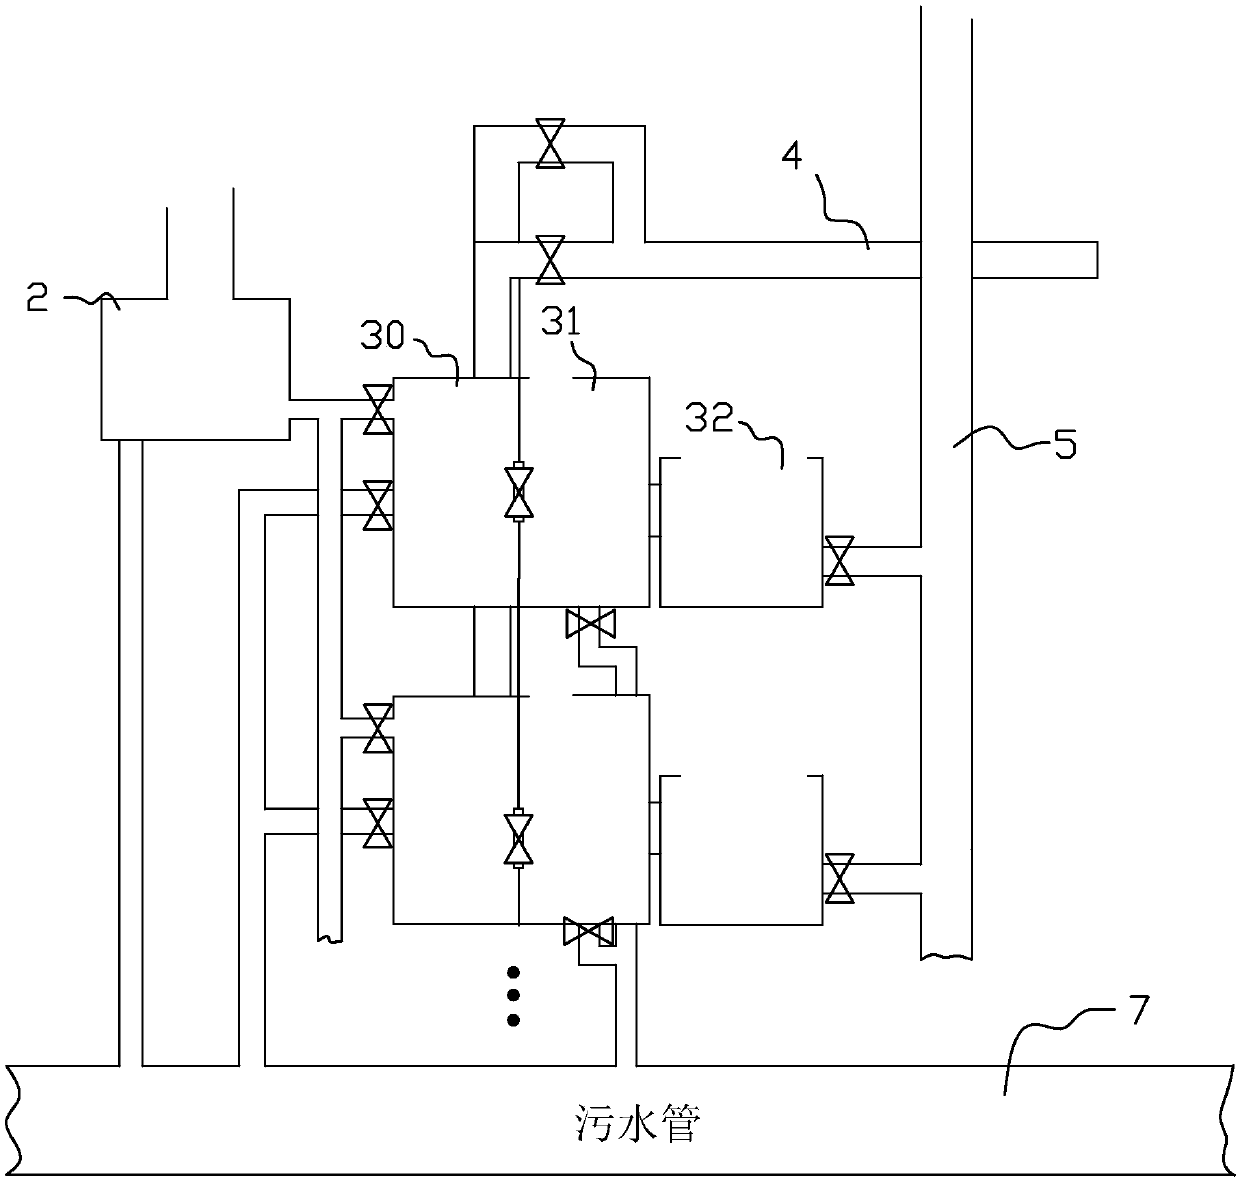 Linear city pipeline network sewage disposal system capable of preparing organic fertilizer, irrigation system and monitoring and control system